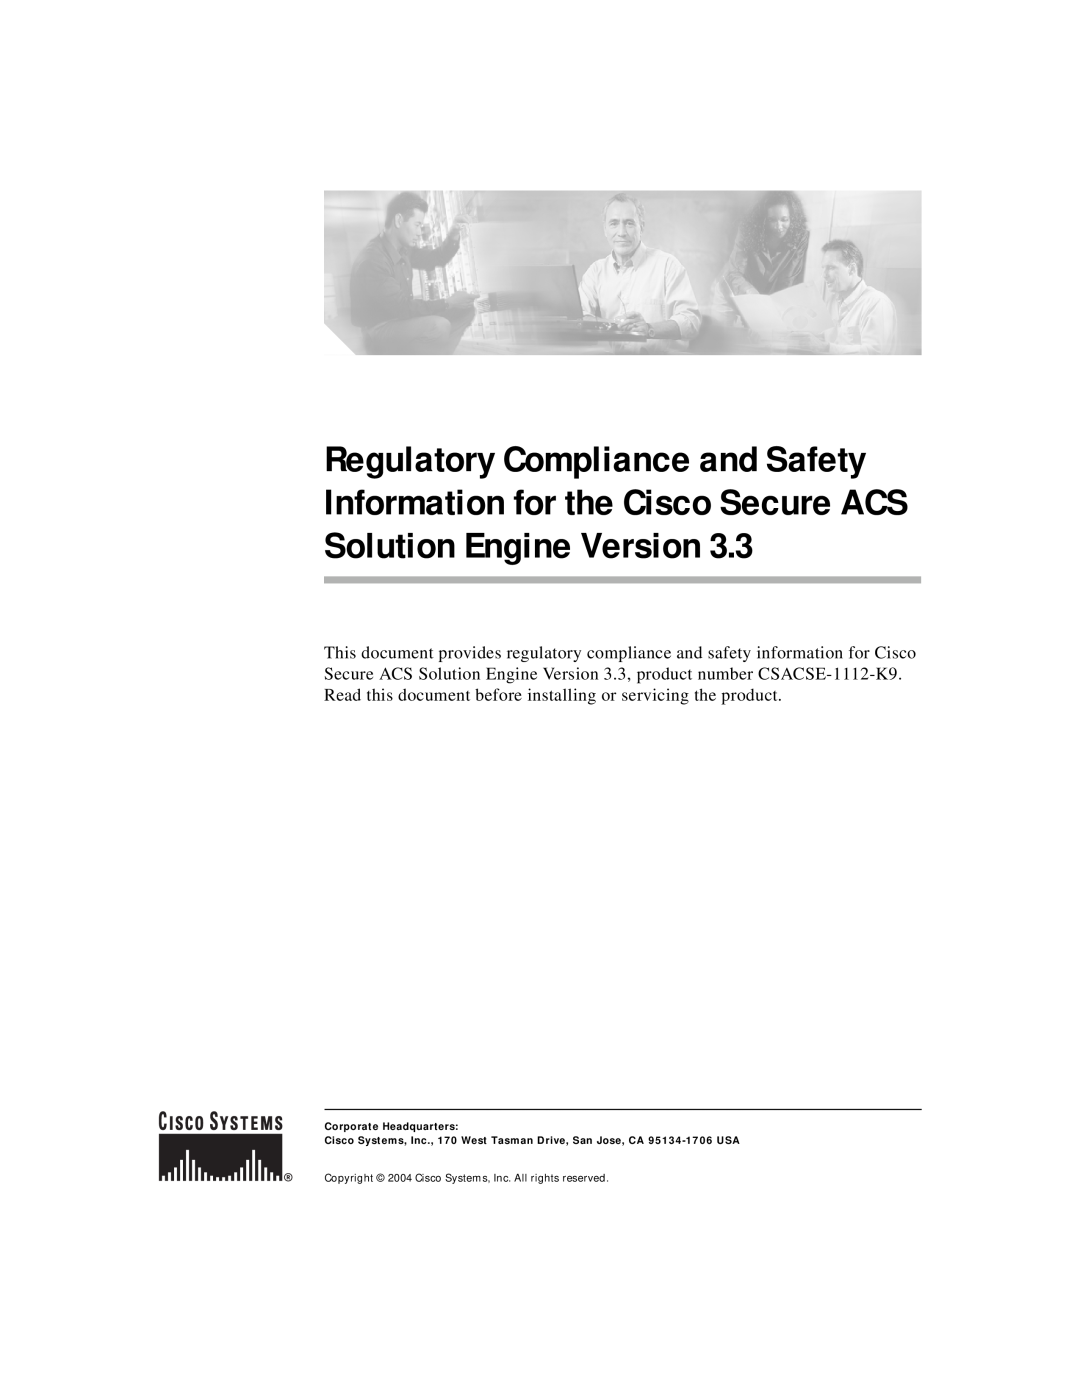 Cisco Systems CSACSE-1112-K9 manual Corporate Headquarters, Copyright 2004 Cisco Systems, Inc. All rights reserved 